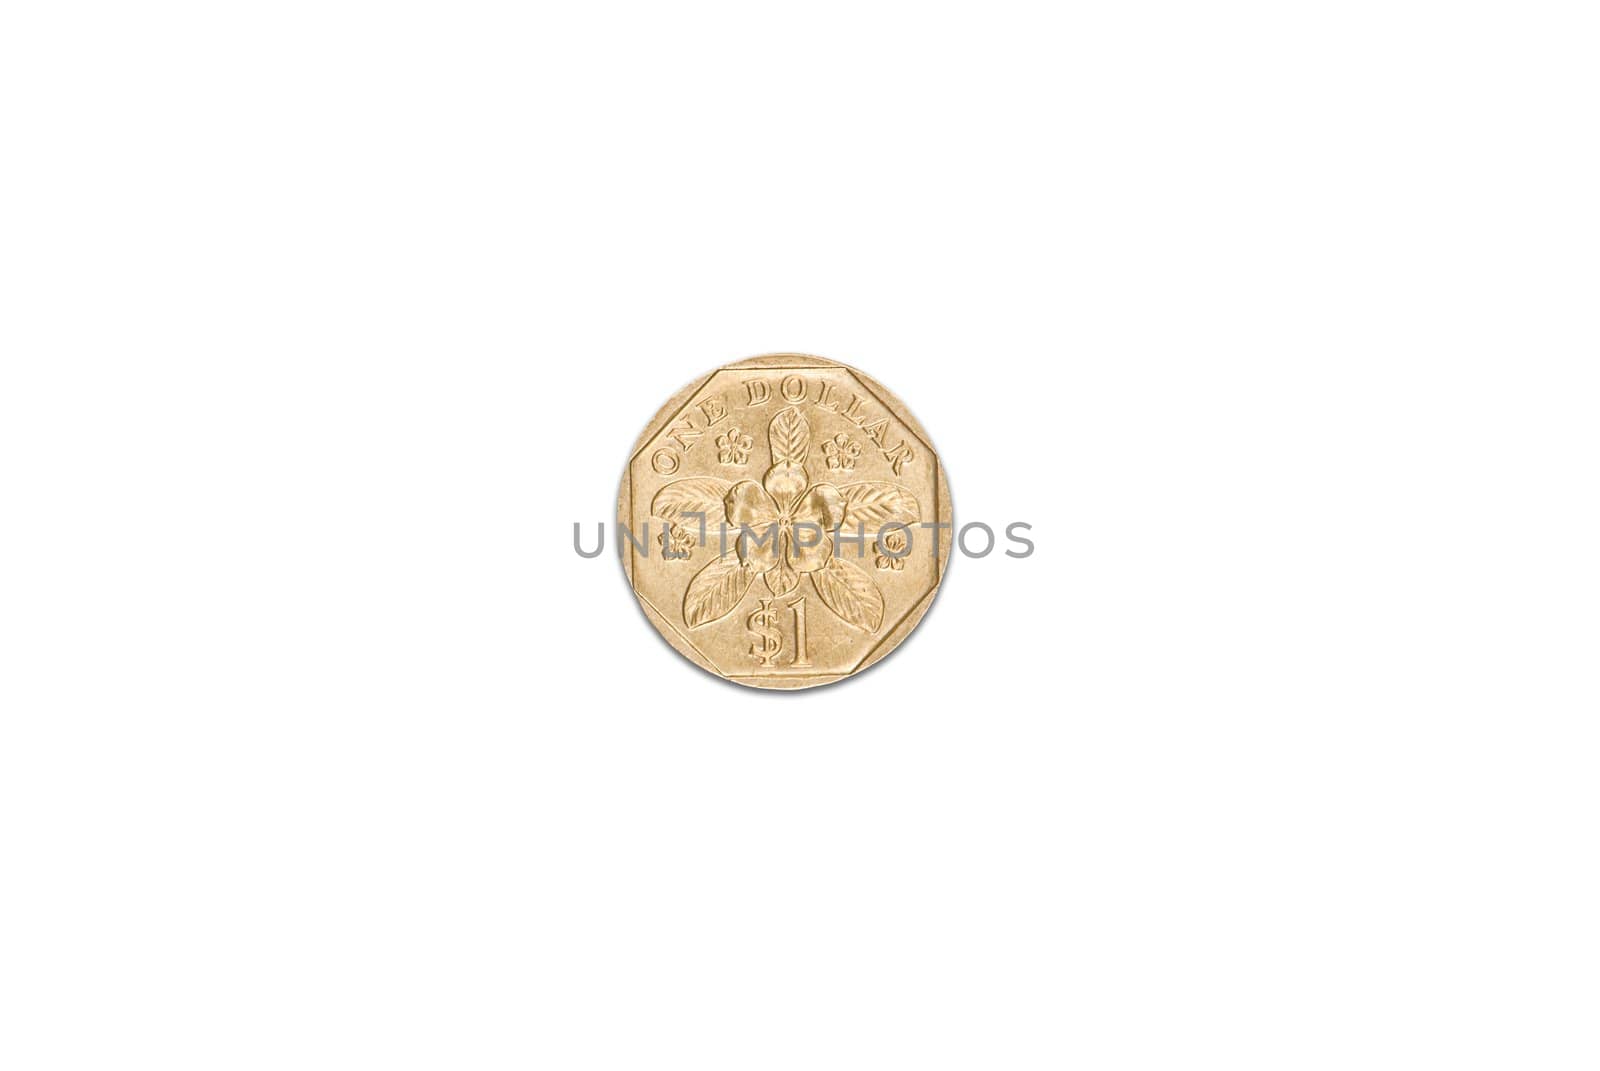 Singapore dollar coin isolated over white background
